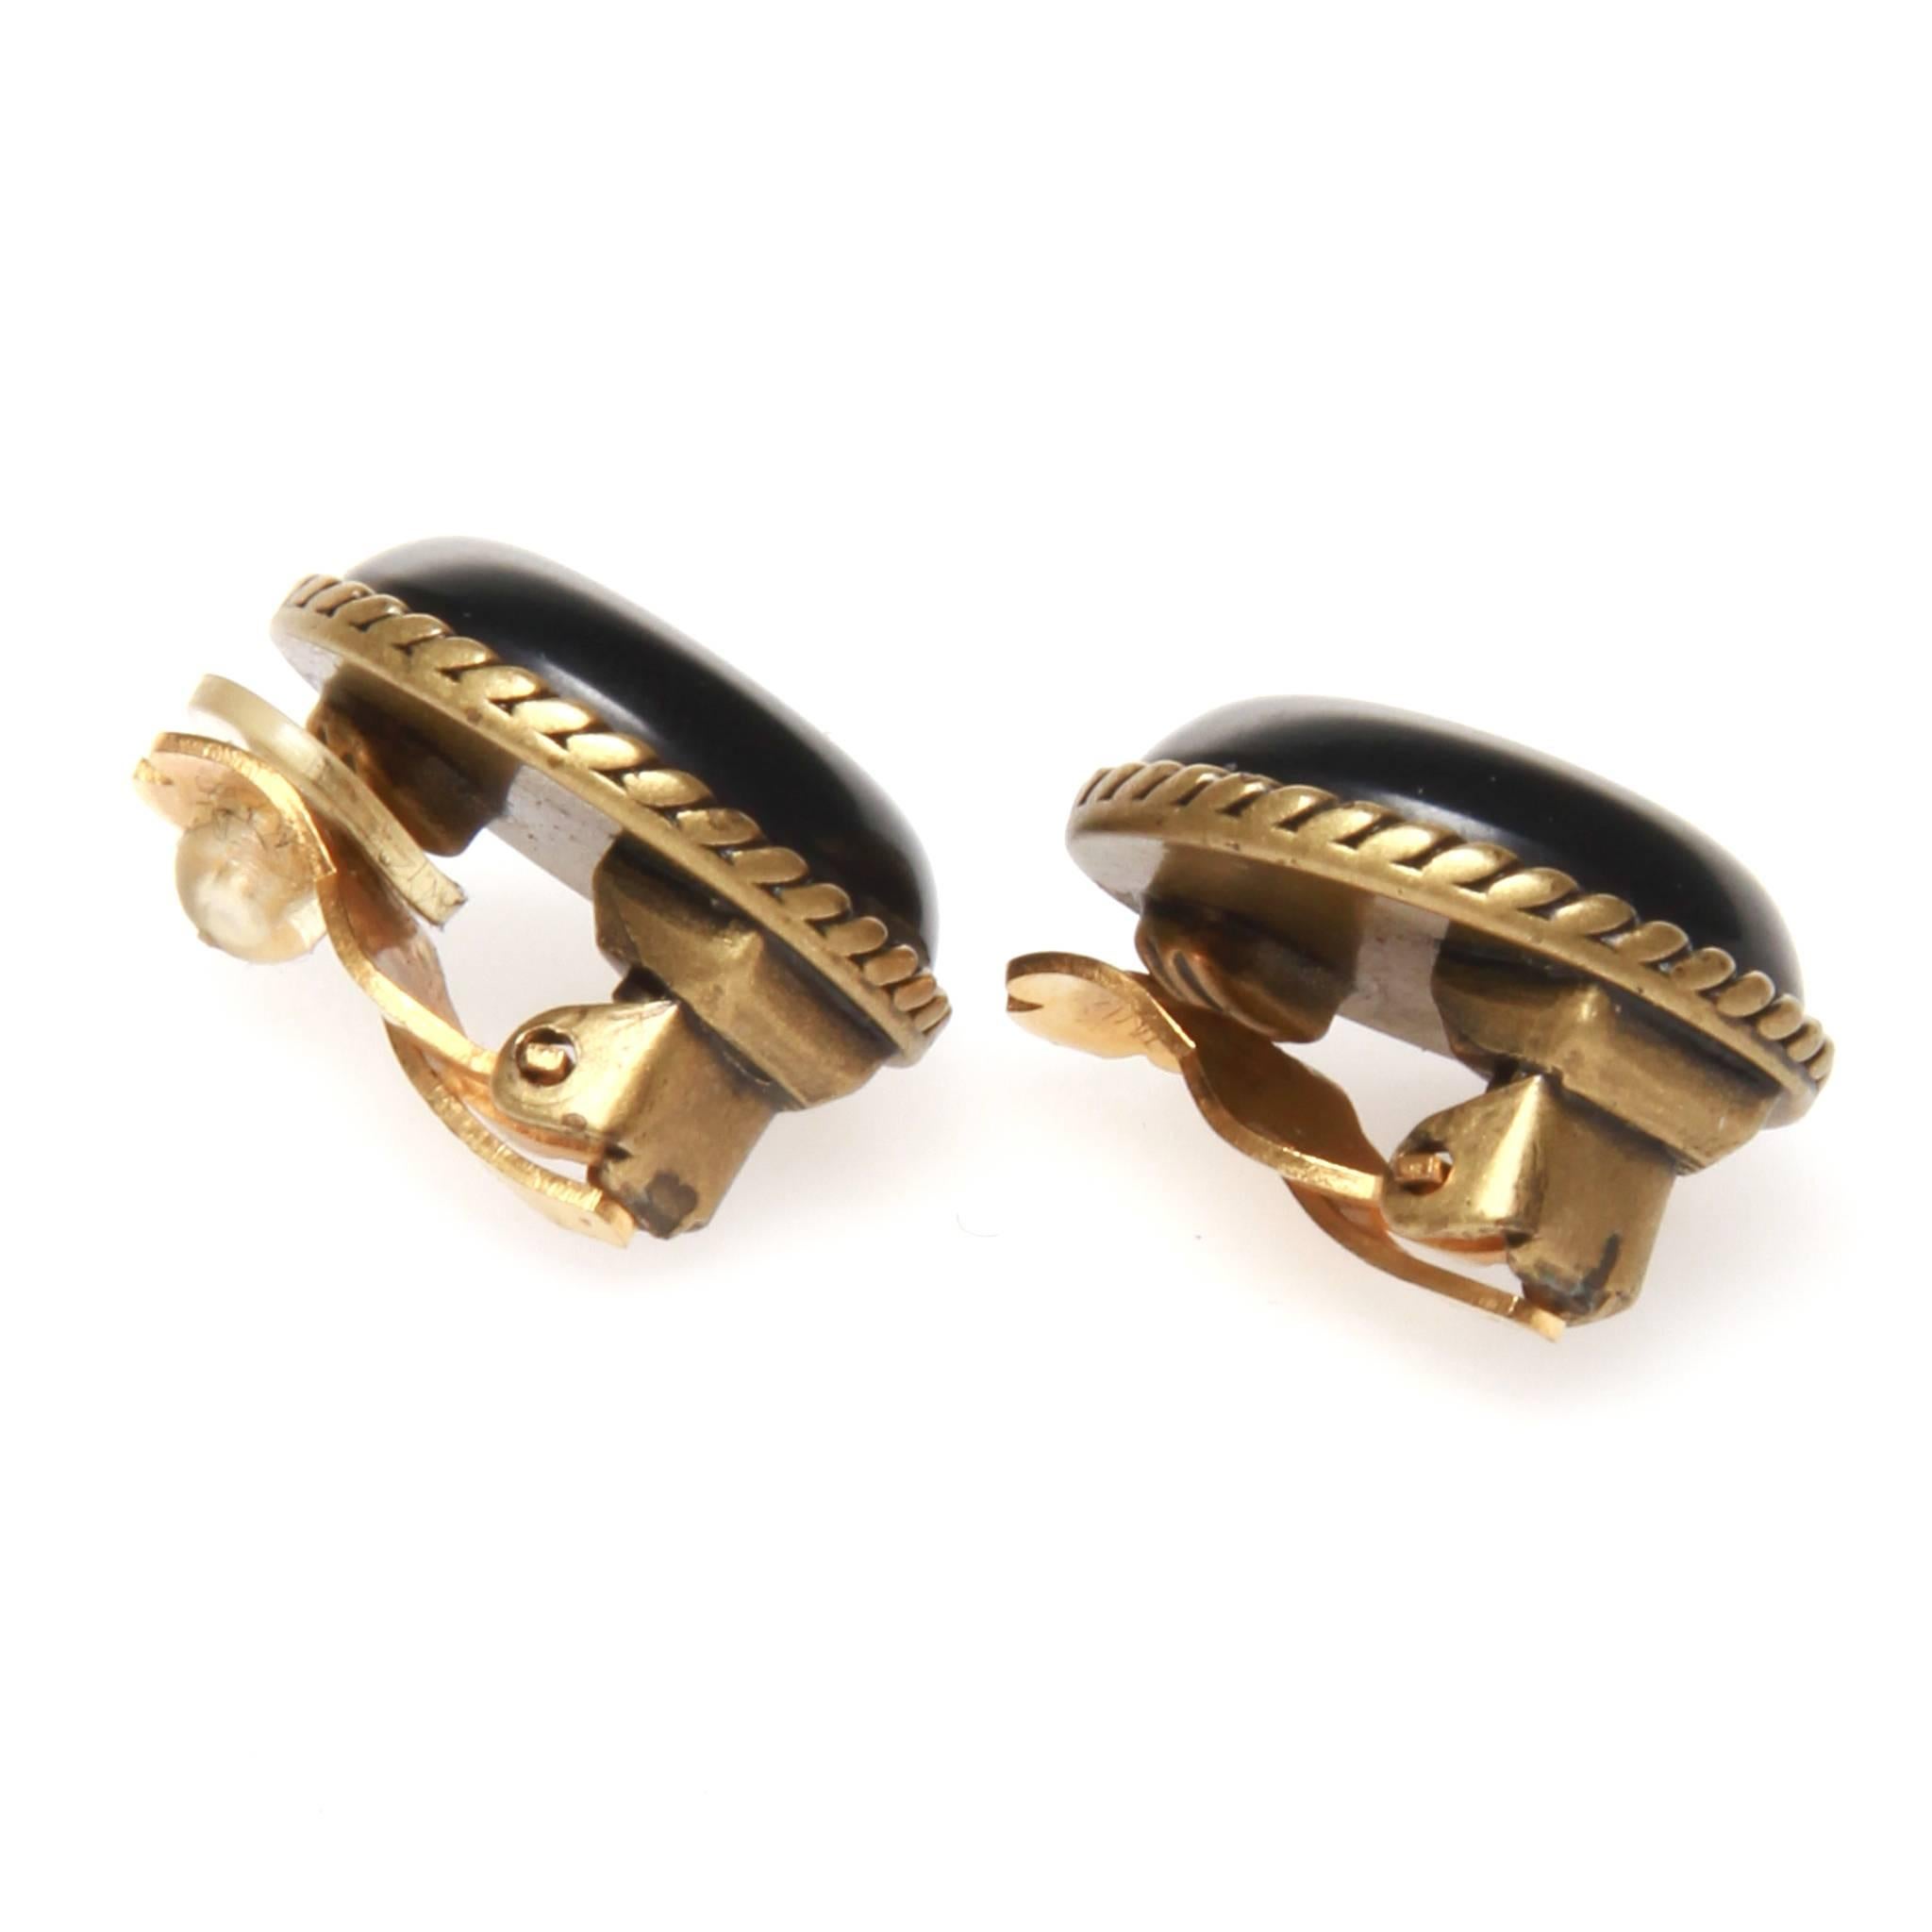 Chanel vintage clip on earrings featuring a CC printed on black resin and set on gold-tone metal. 